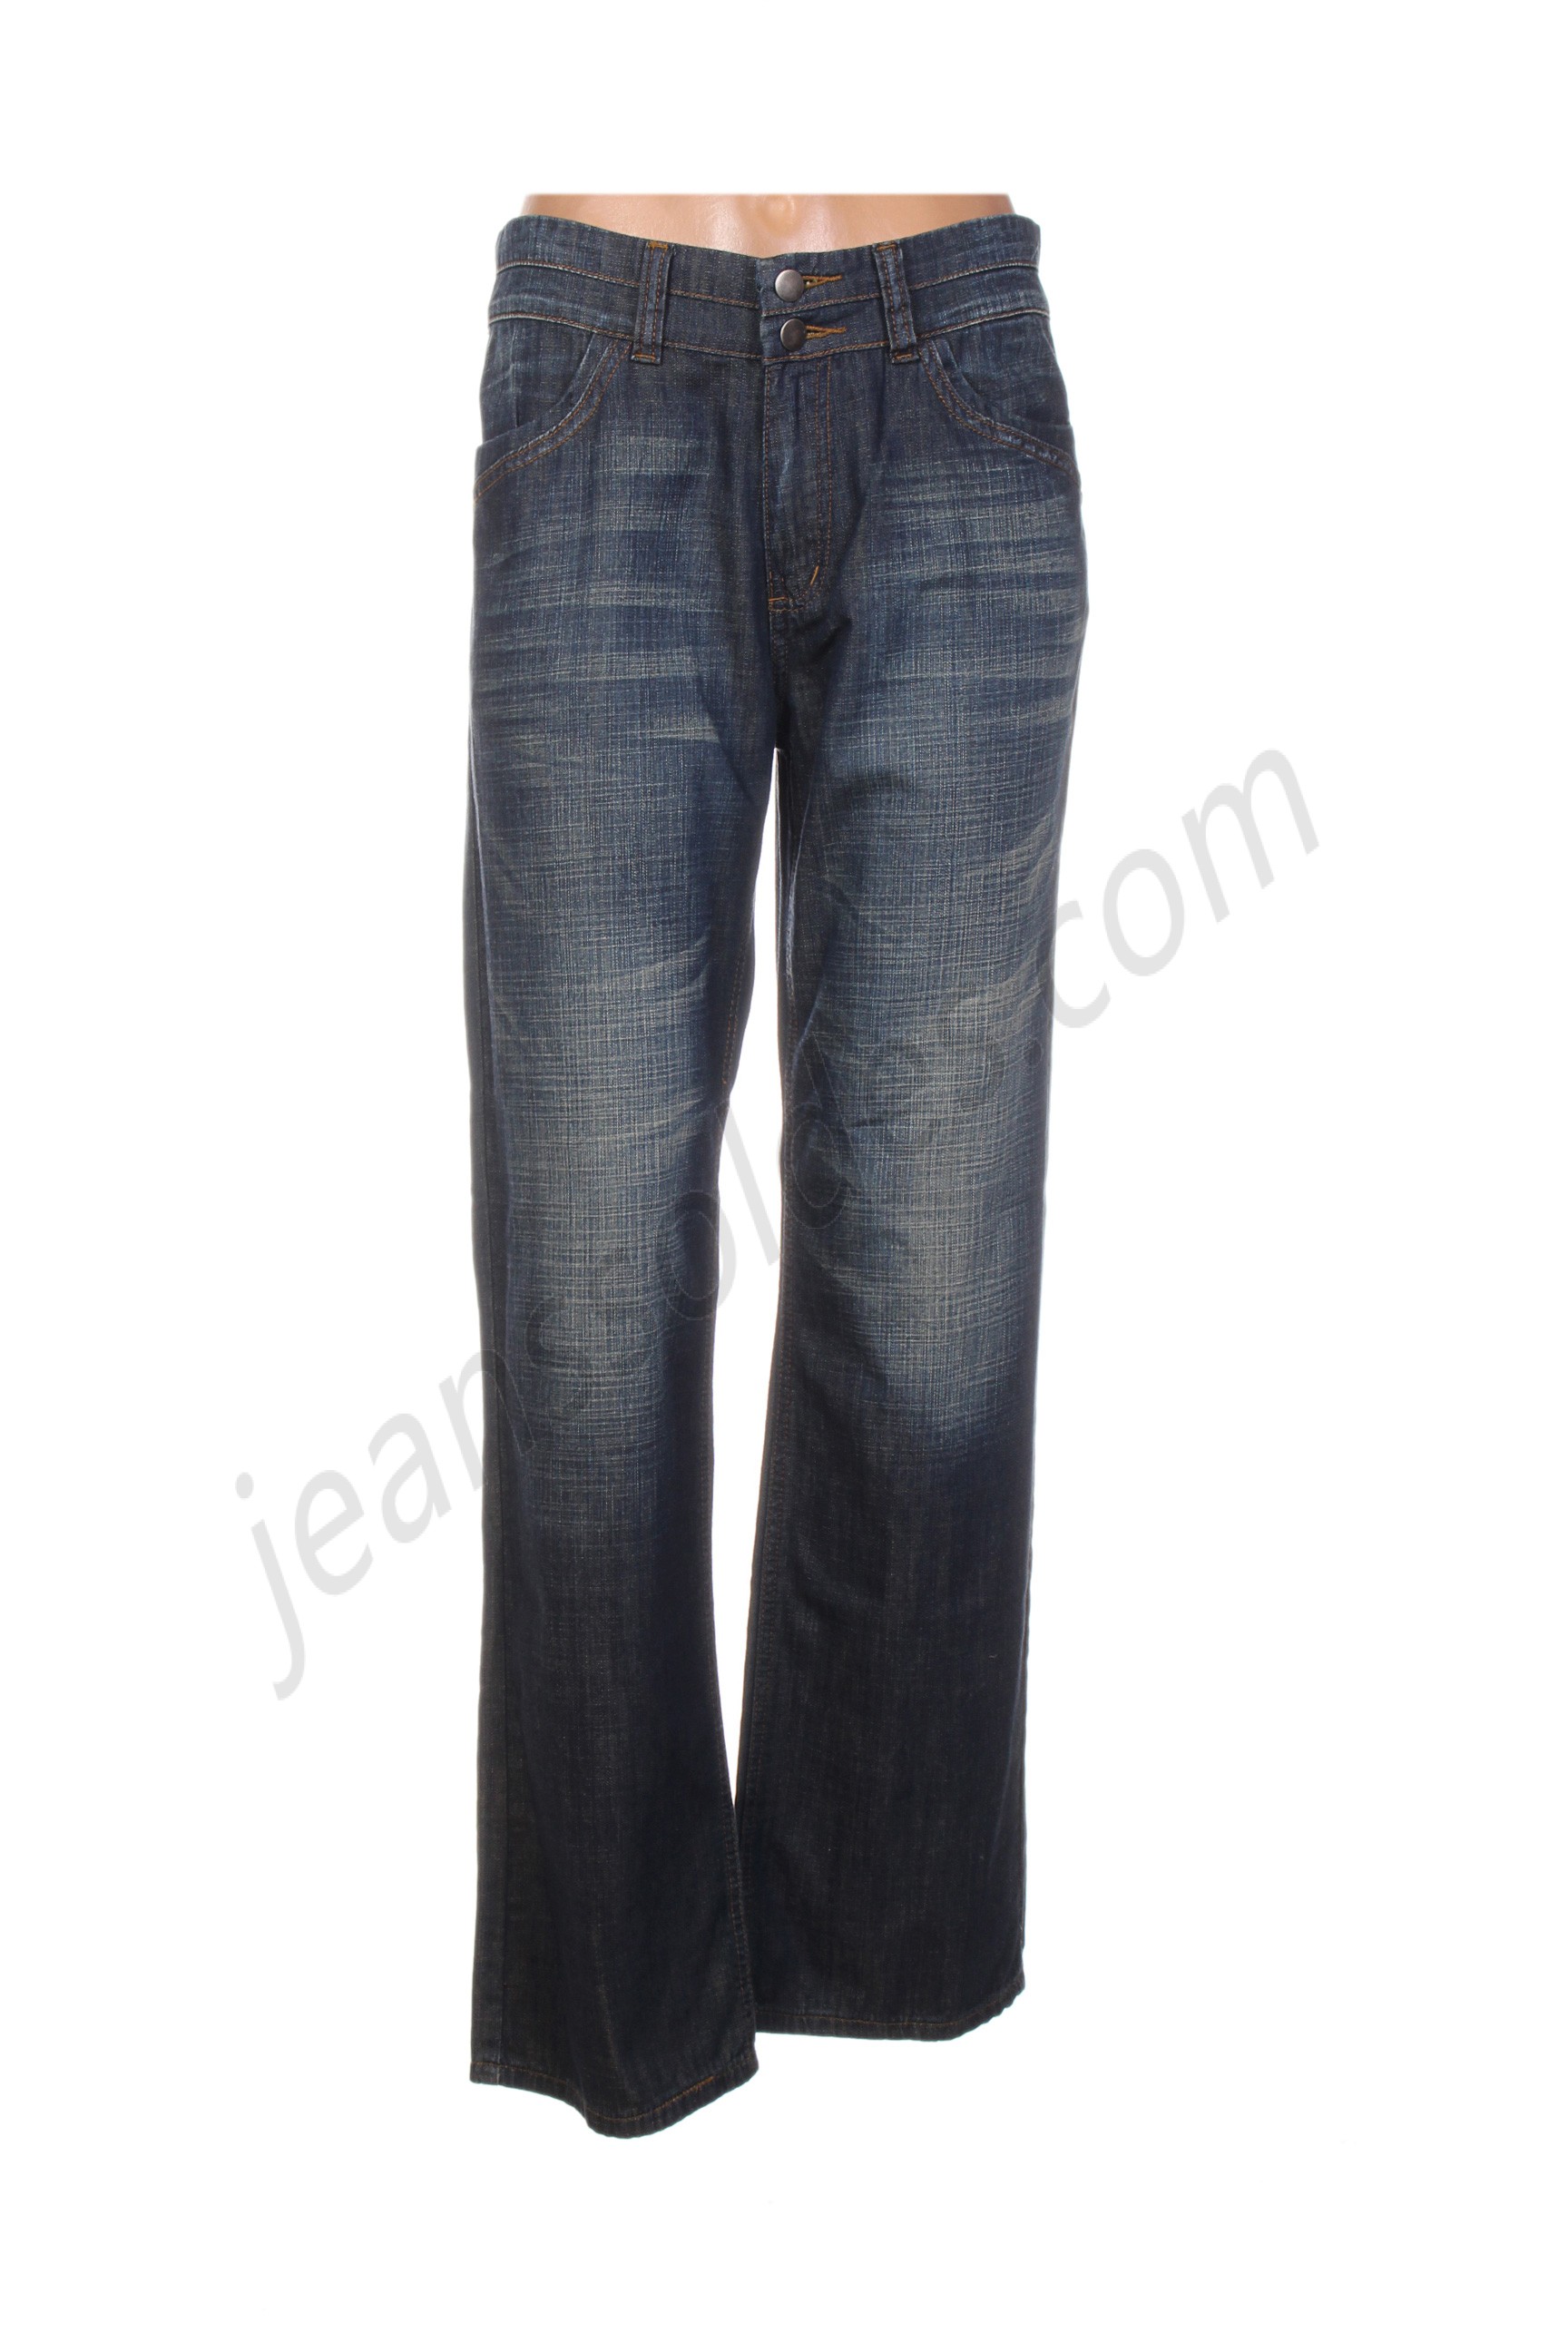 see-Jeans coupe droite prix d’amis - see-Jeans coupe droite prix d’amis